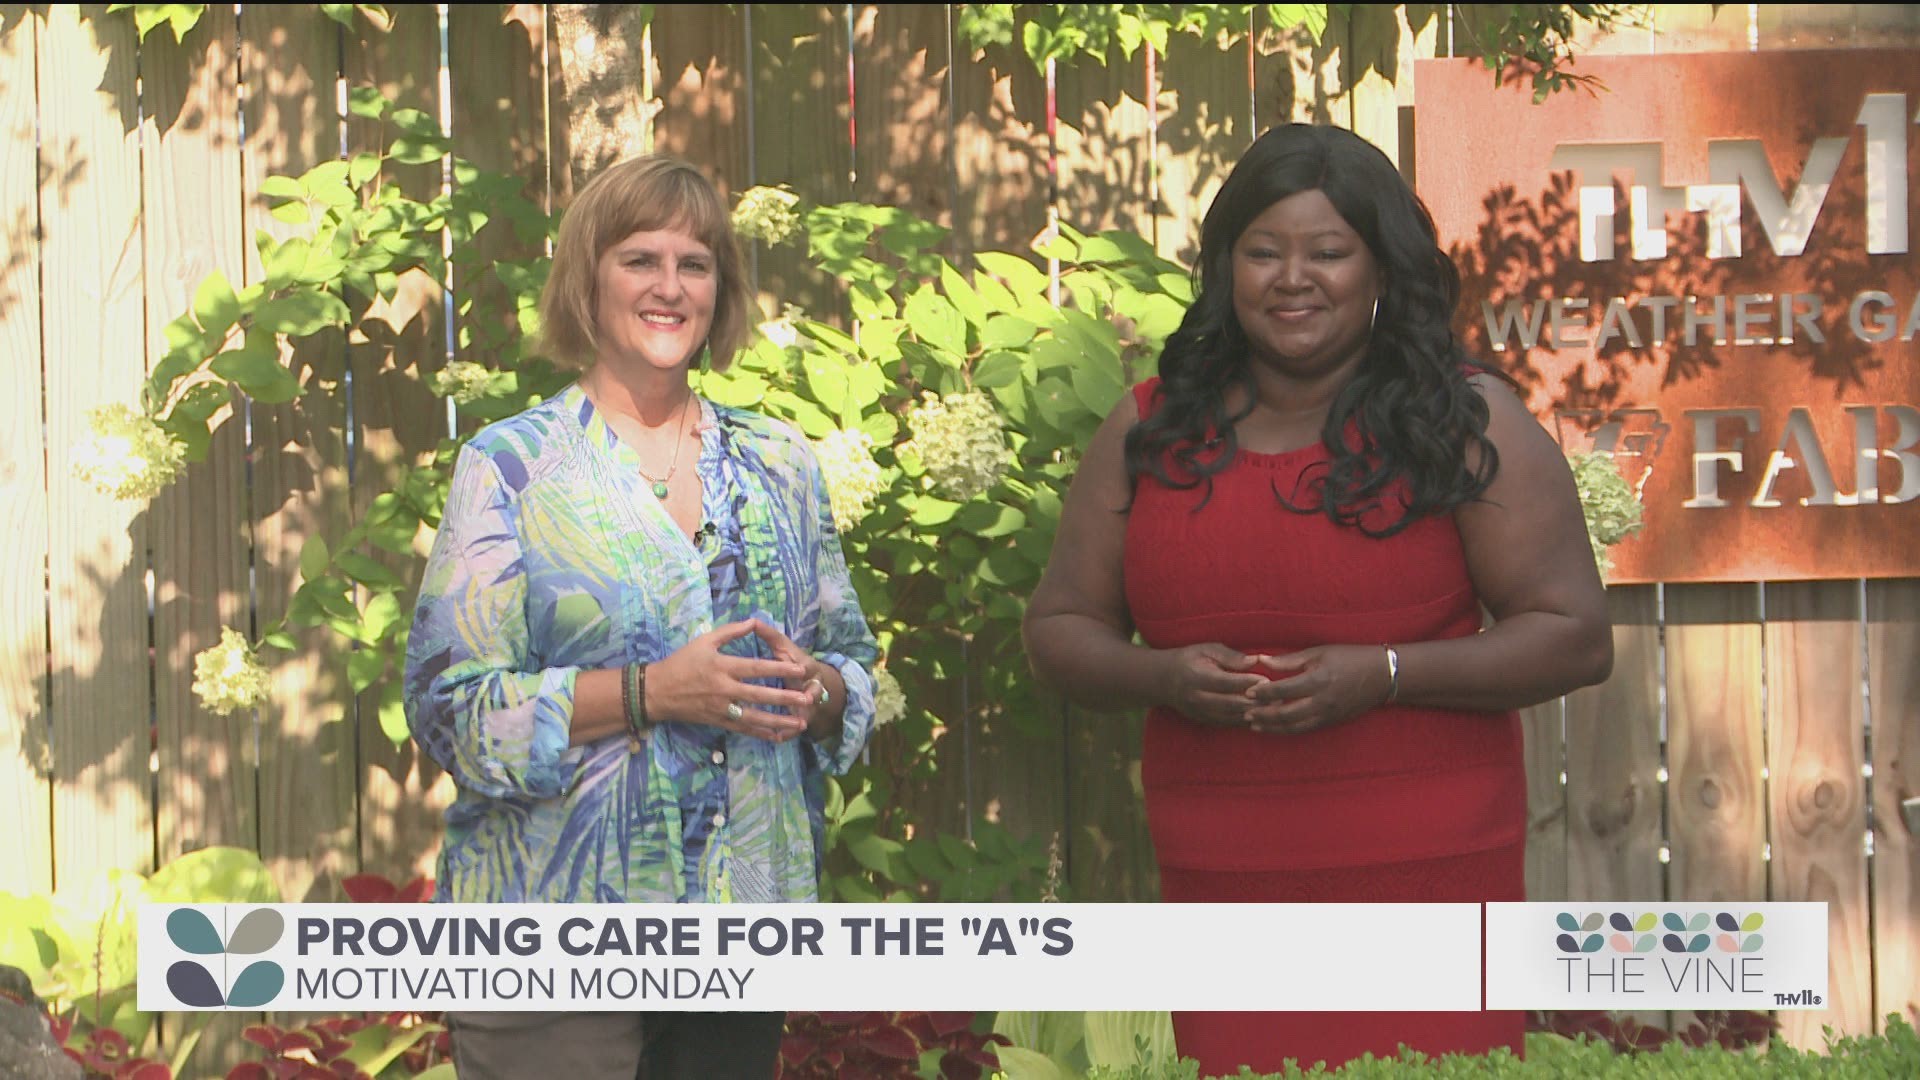 Life coach Deana Williams shares advice for providing care for the three “A’s” population: people with autism, ADHD, and Alzheimer’s.